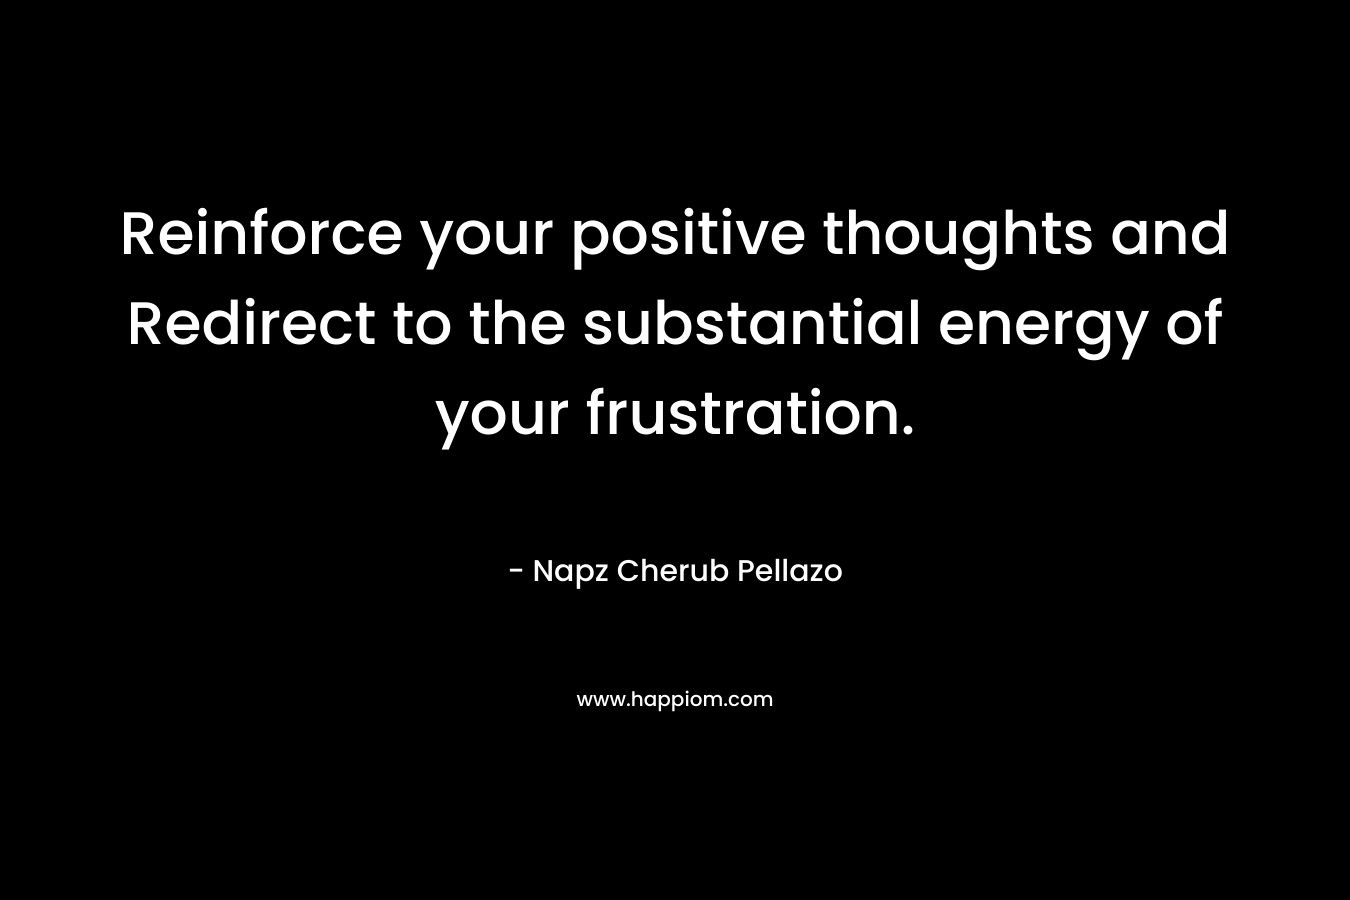 Reinforce your positive thoughts and Redirect to the substantial energy of your frustration. – Napz Cherub Pellazo